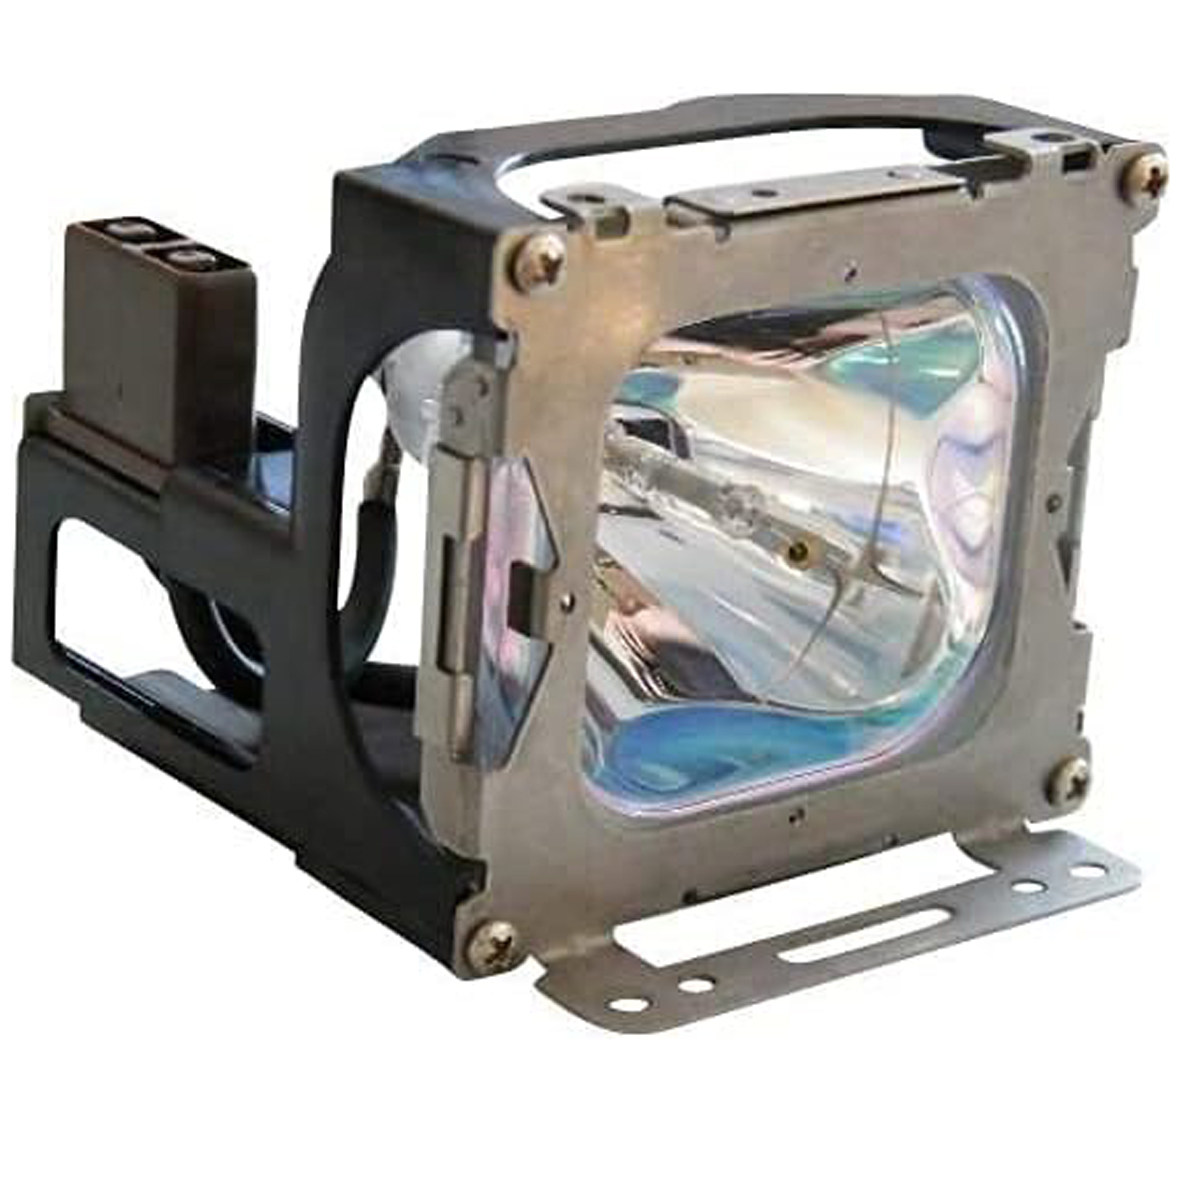 Replacement Projector lamp DT00205 For Hitachi CP-S840A CP -S840W CP-S935W CP-S938W